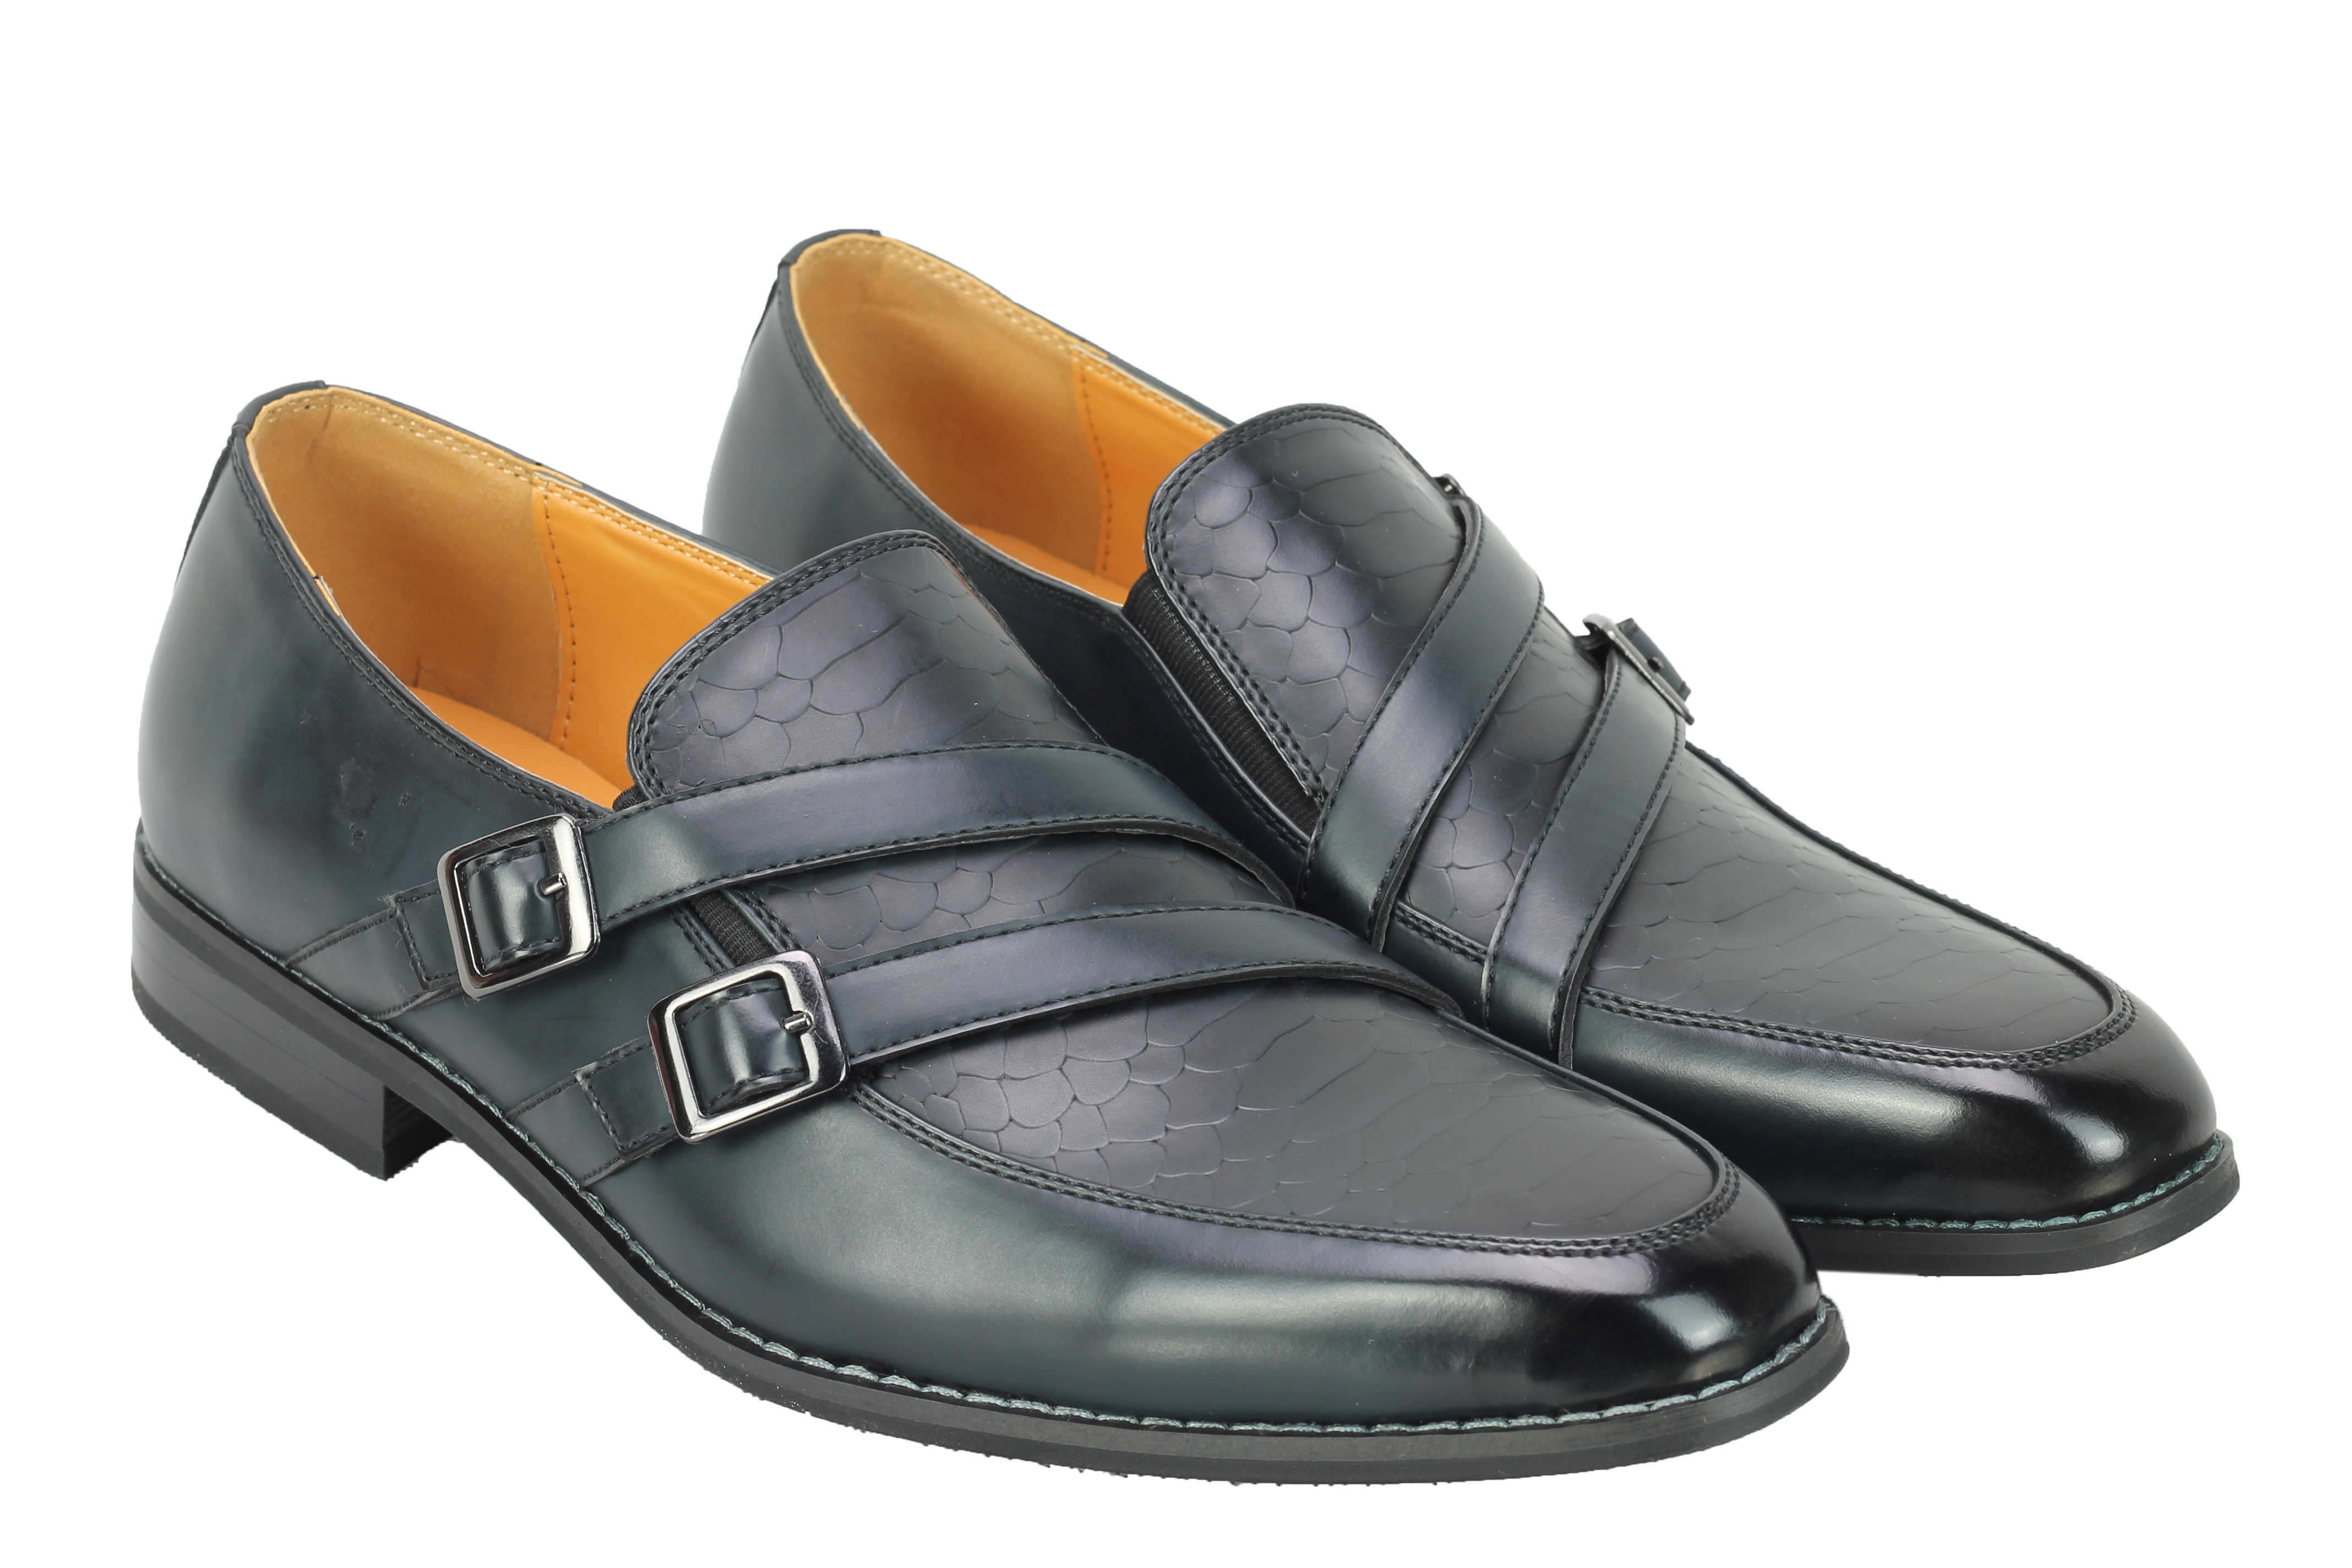 New Mens Faux Leather Italian Designer Monk Strap Smart Casual Slip on Loafer Shoes UK Size 